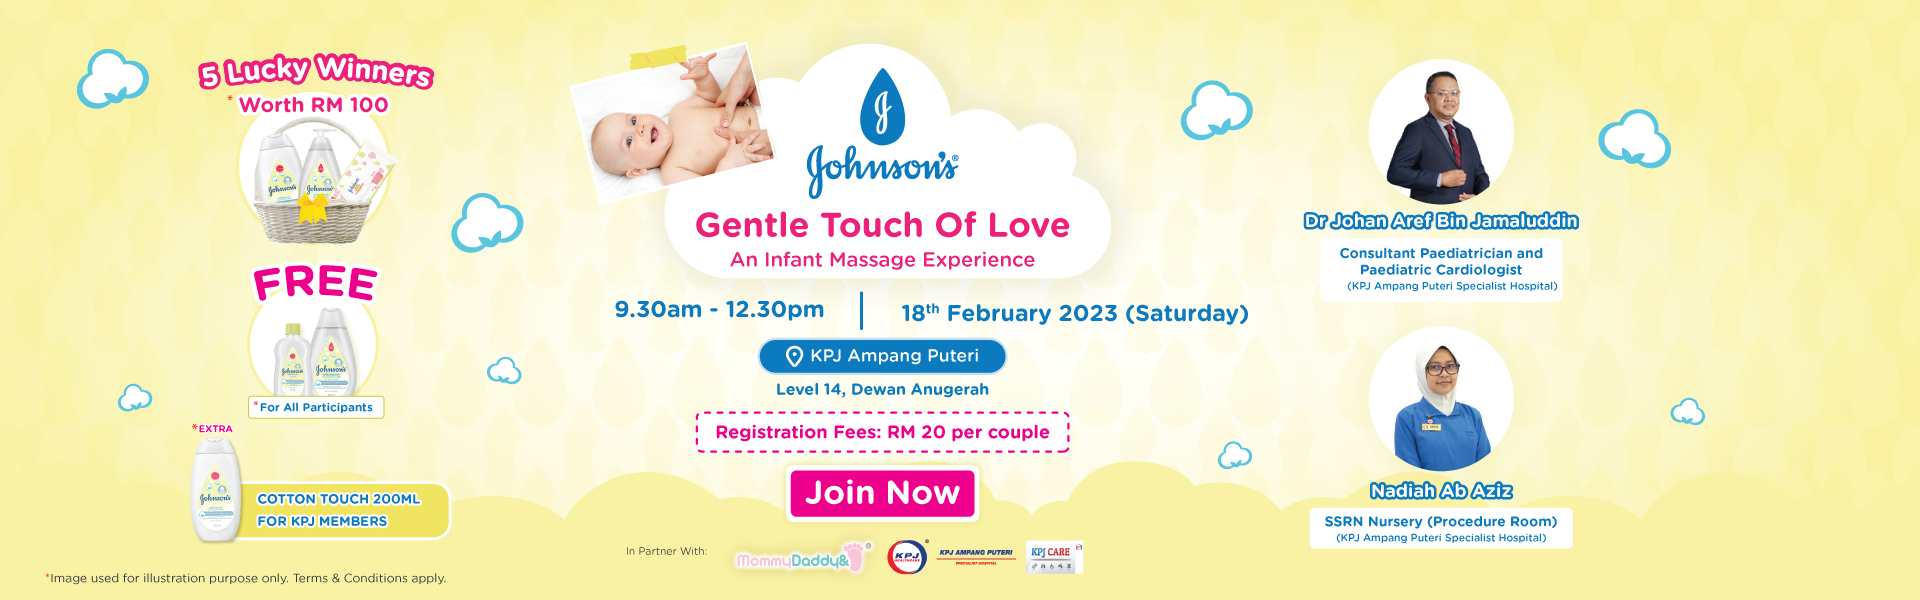 Johnson and Johnson A Gentle Touch Of Love An Infant Massage Experience Workshop